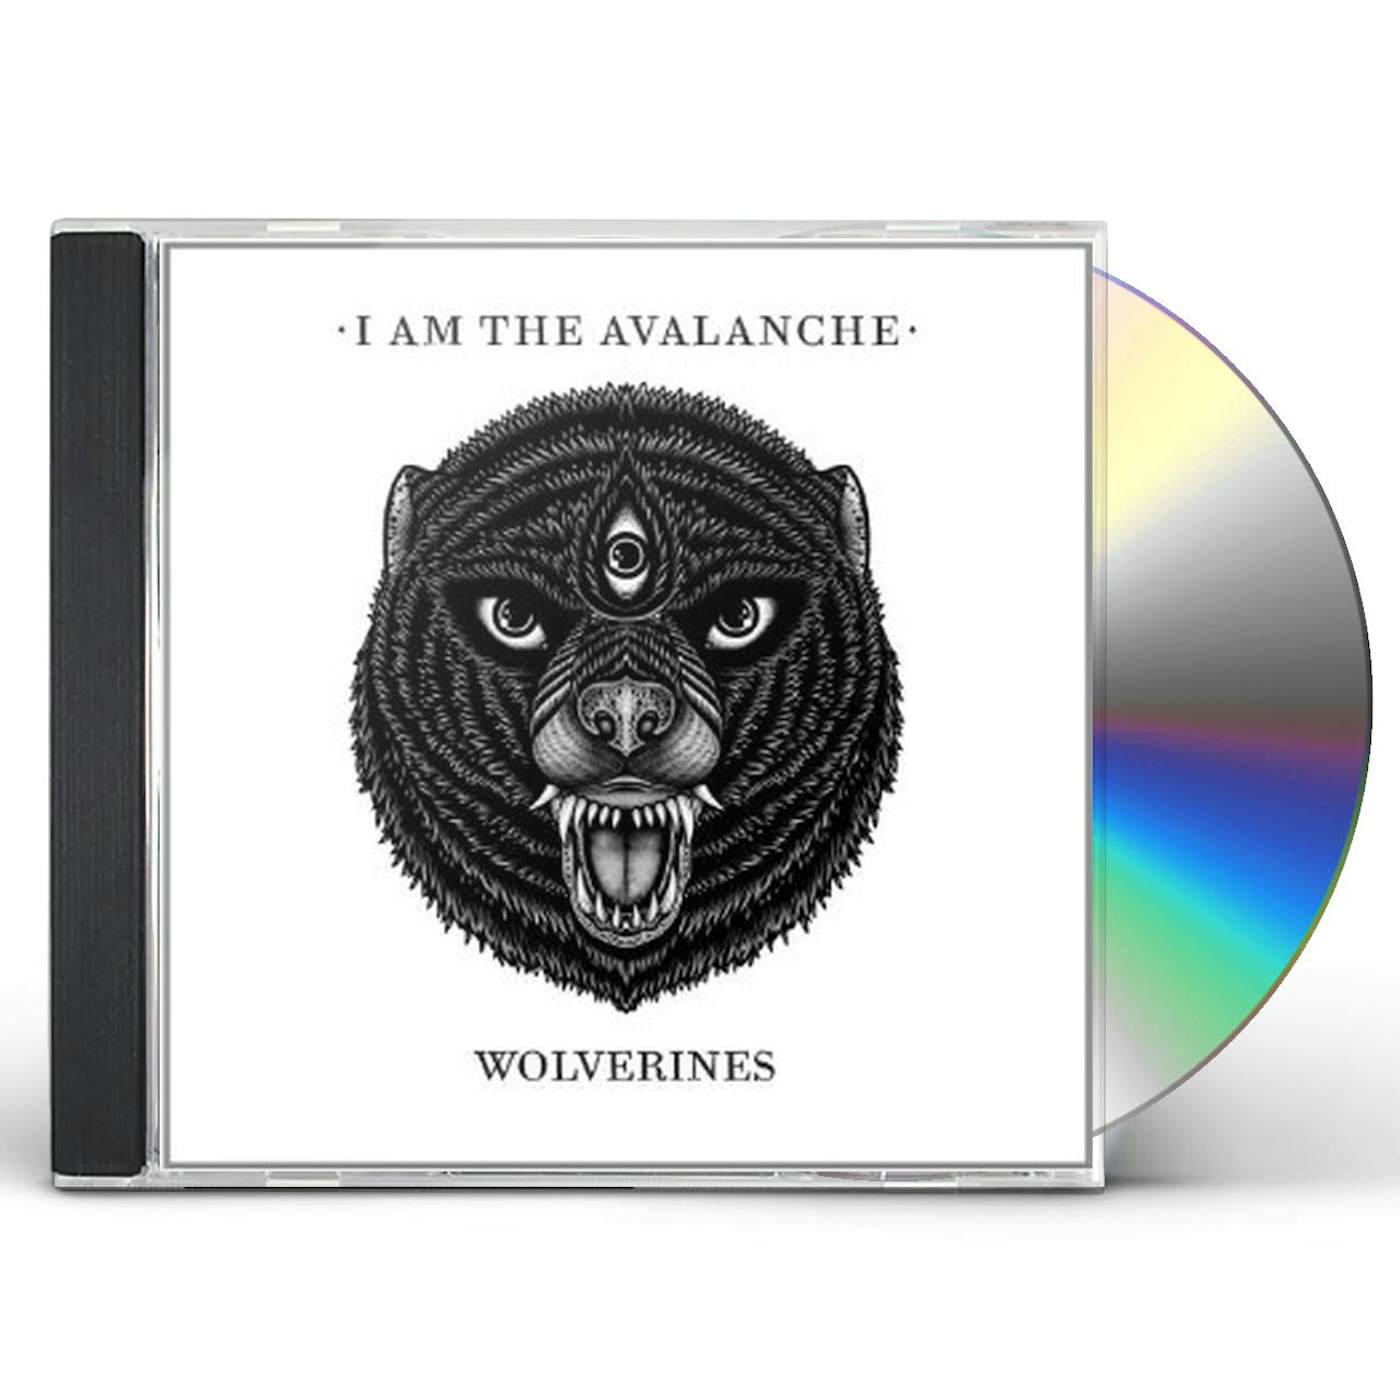 I Am The Avalanche WOLVERINES CD